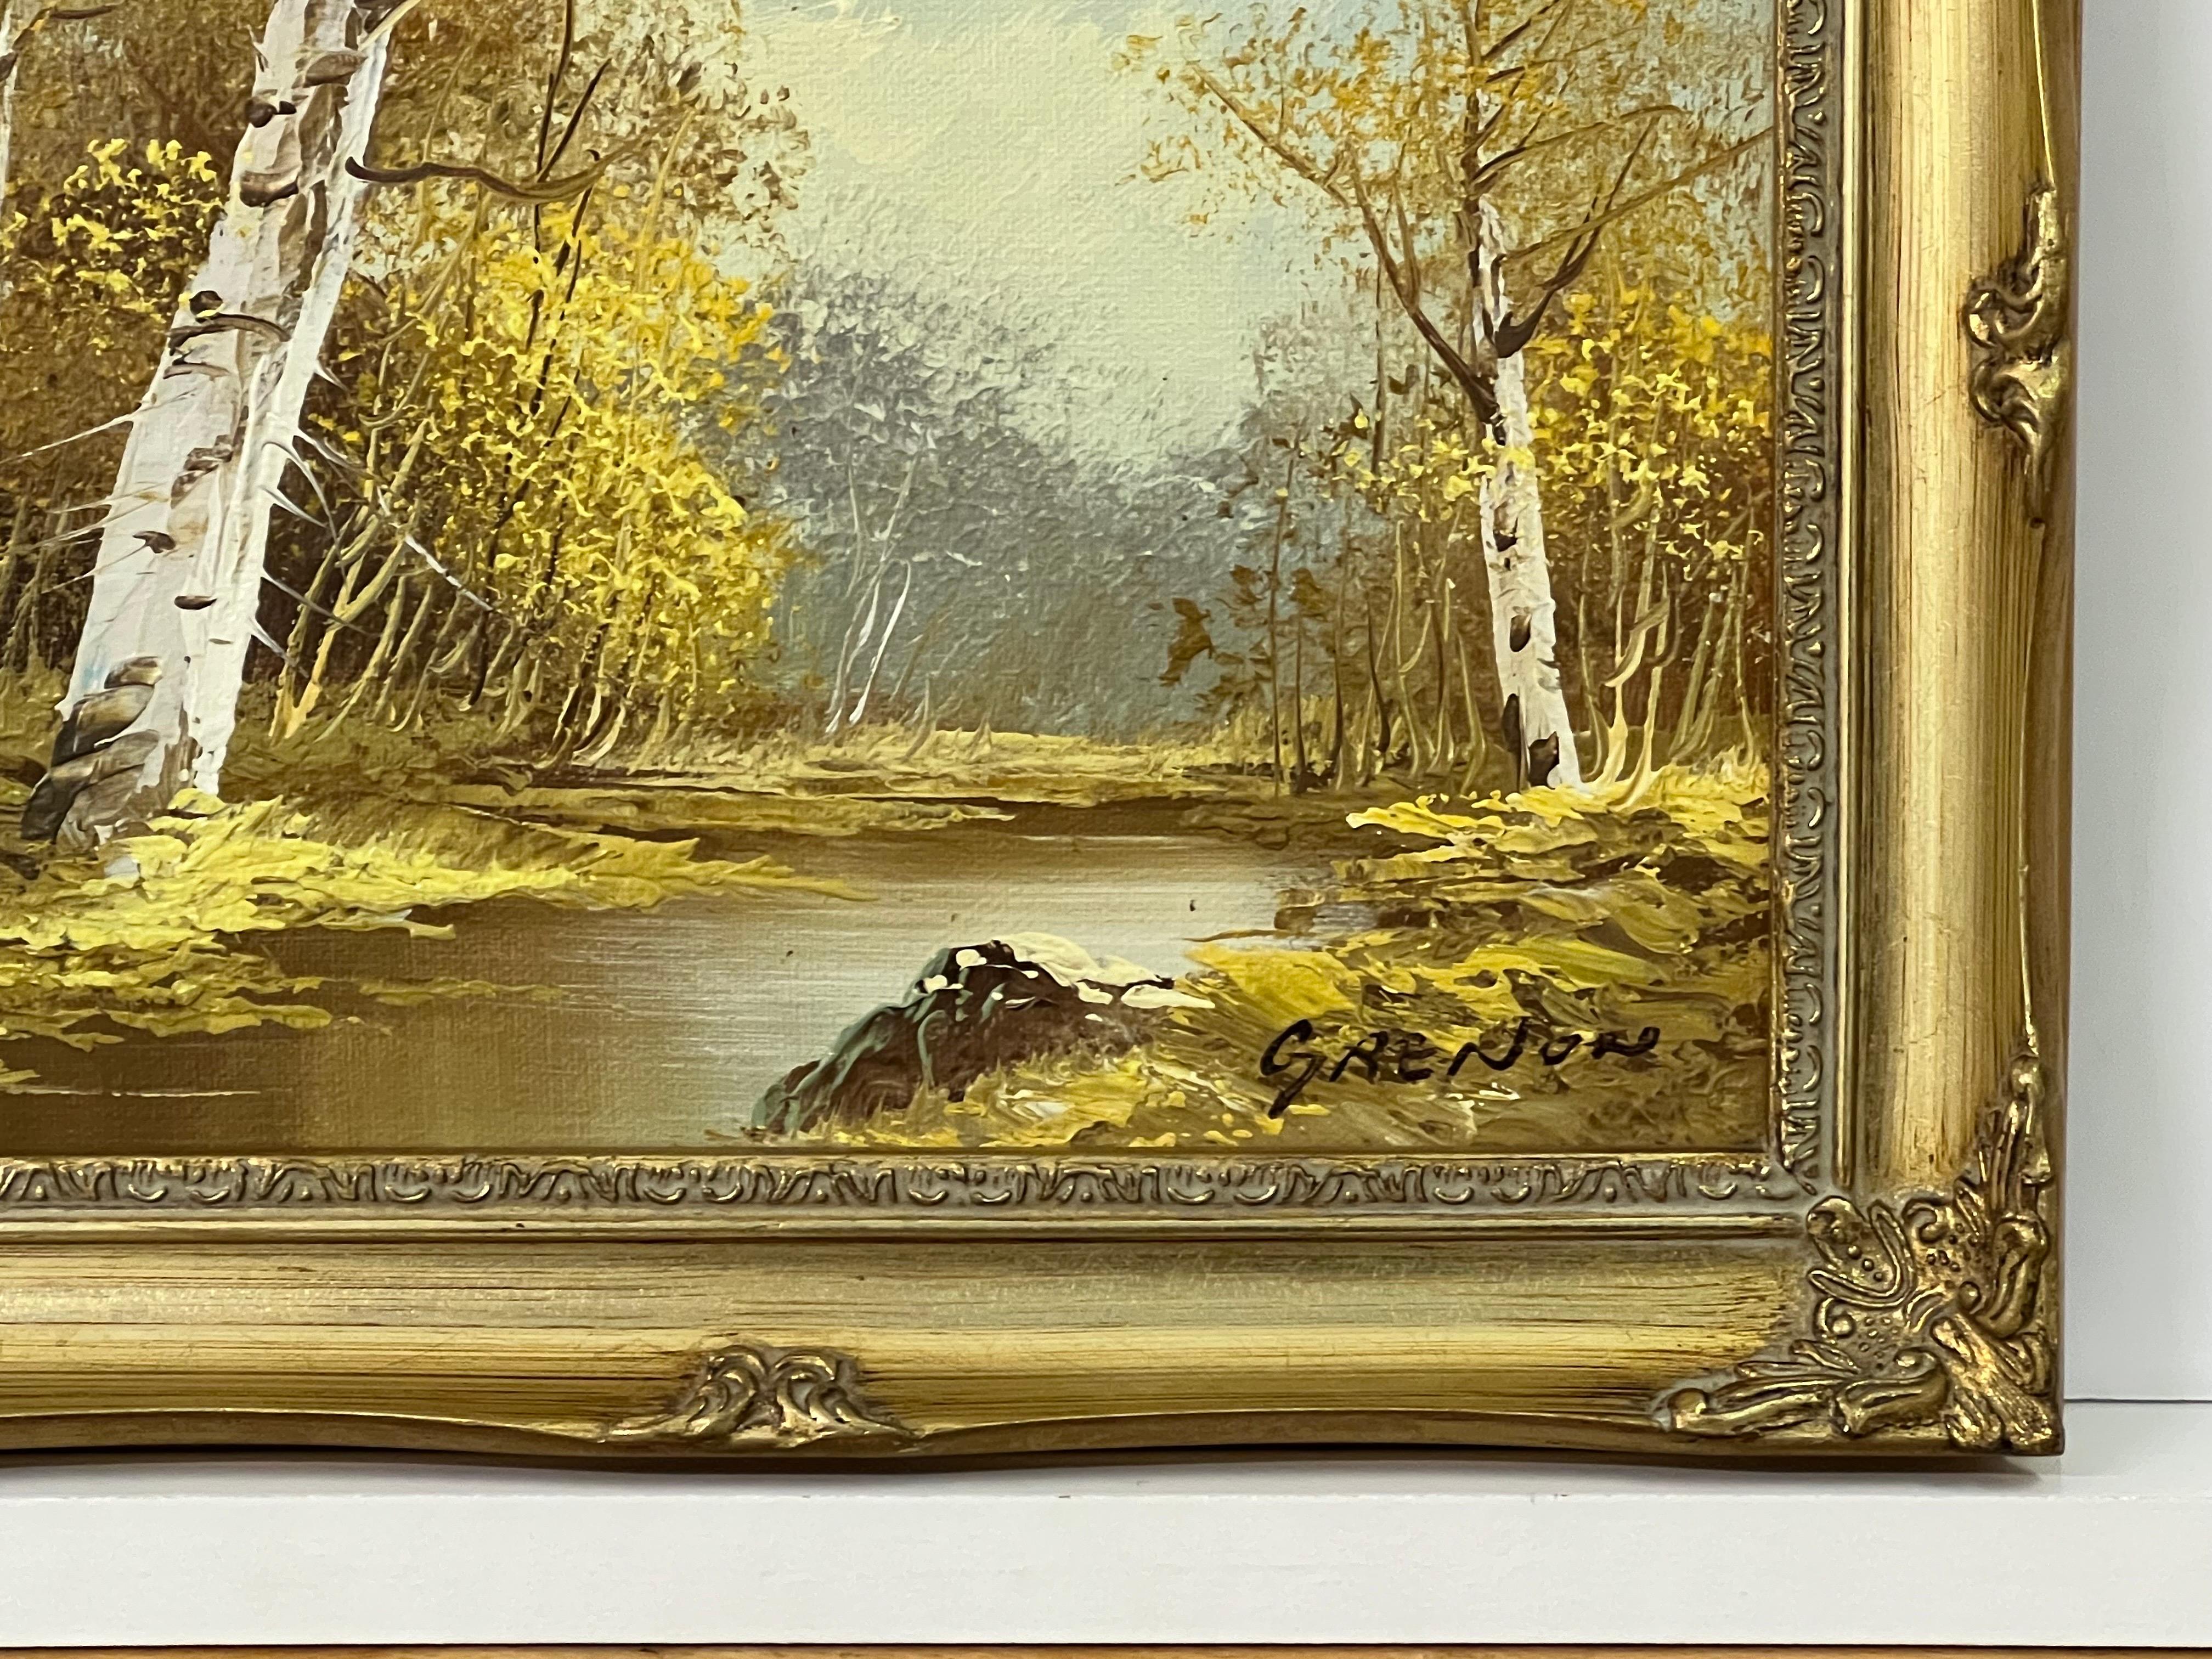 Vintage 20th Century Oil Painting of a River Landscape with Silver Birch Trees 

Art measures 10 x 8 inches 
Frame measures 12 x 10 inches 

Presented in the original period frame 